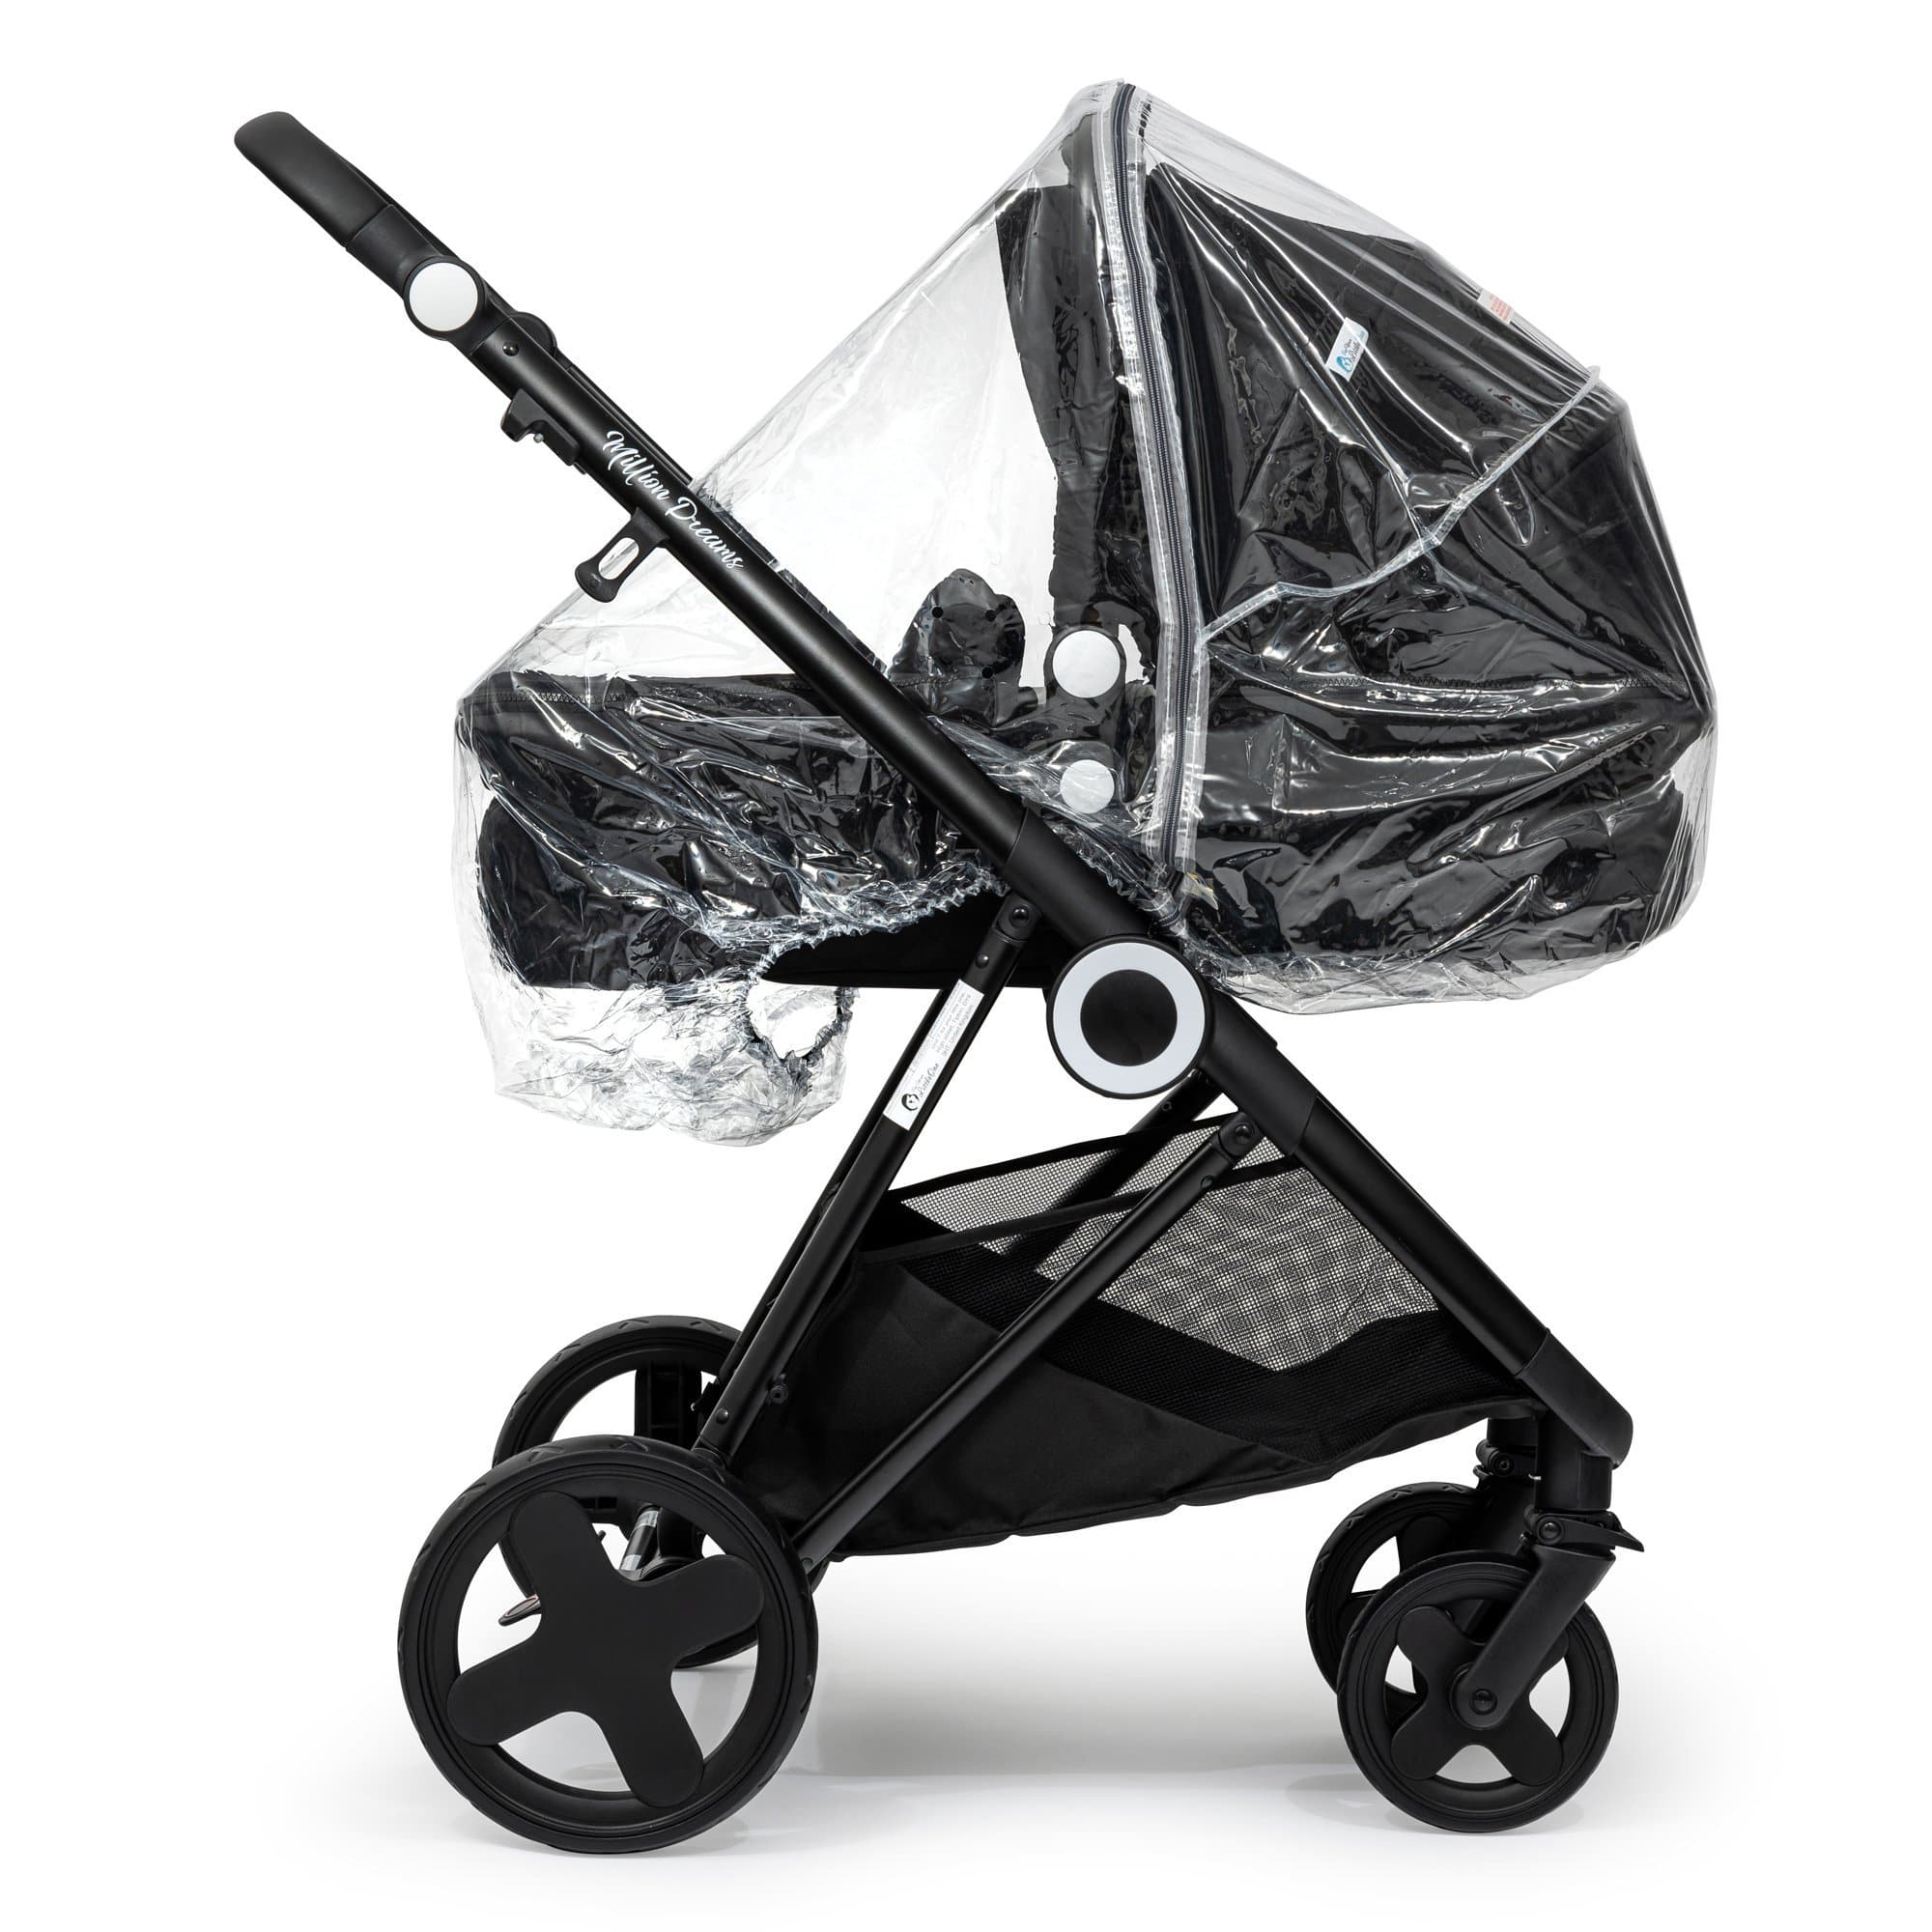 2 in 1 Rain Cover Compatible with Hauck - Fits All Models - For Your Little One